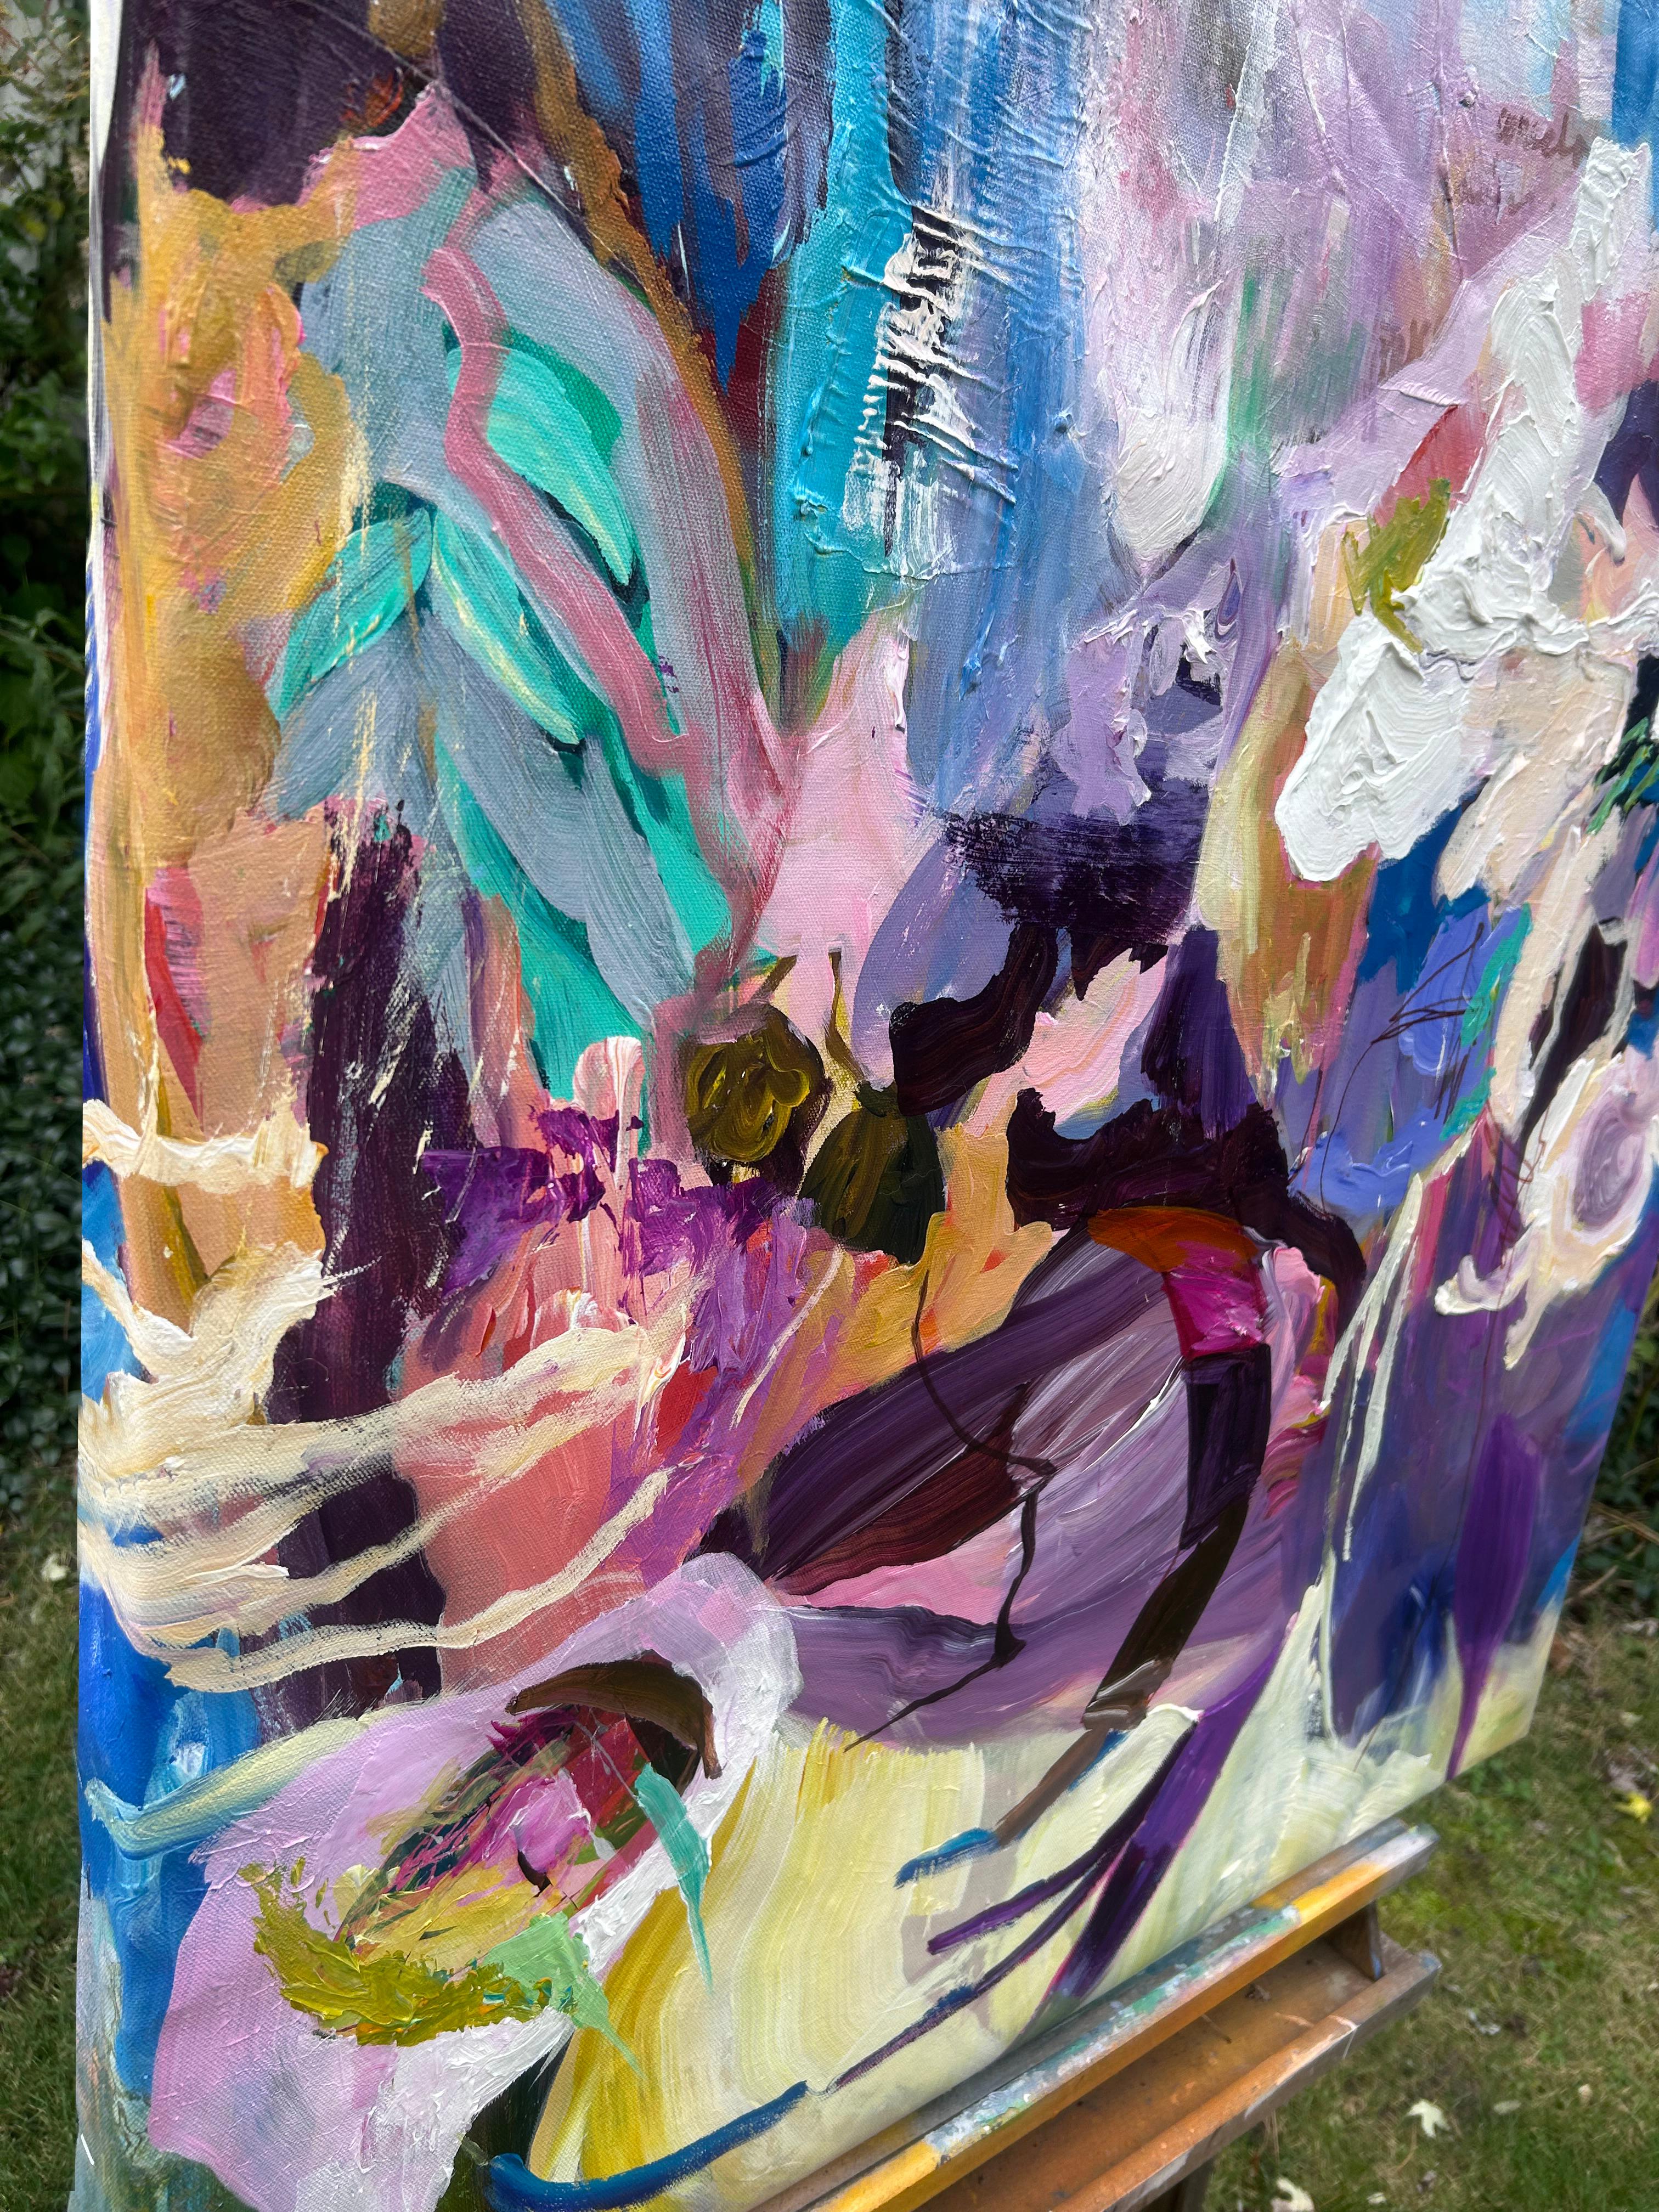 <p>Artist Comments<br>Bold contrasts and intricate textural details define this large abstract painting. The striking blue, purple, and yellow florals imbue a dreamy quality into the composition, while light magenta and white accents fill the gaps,